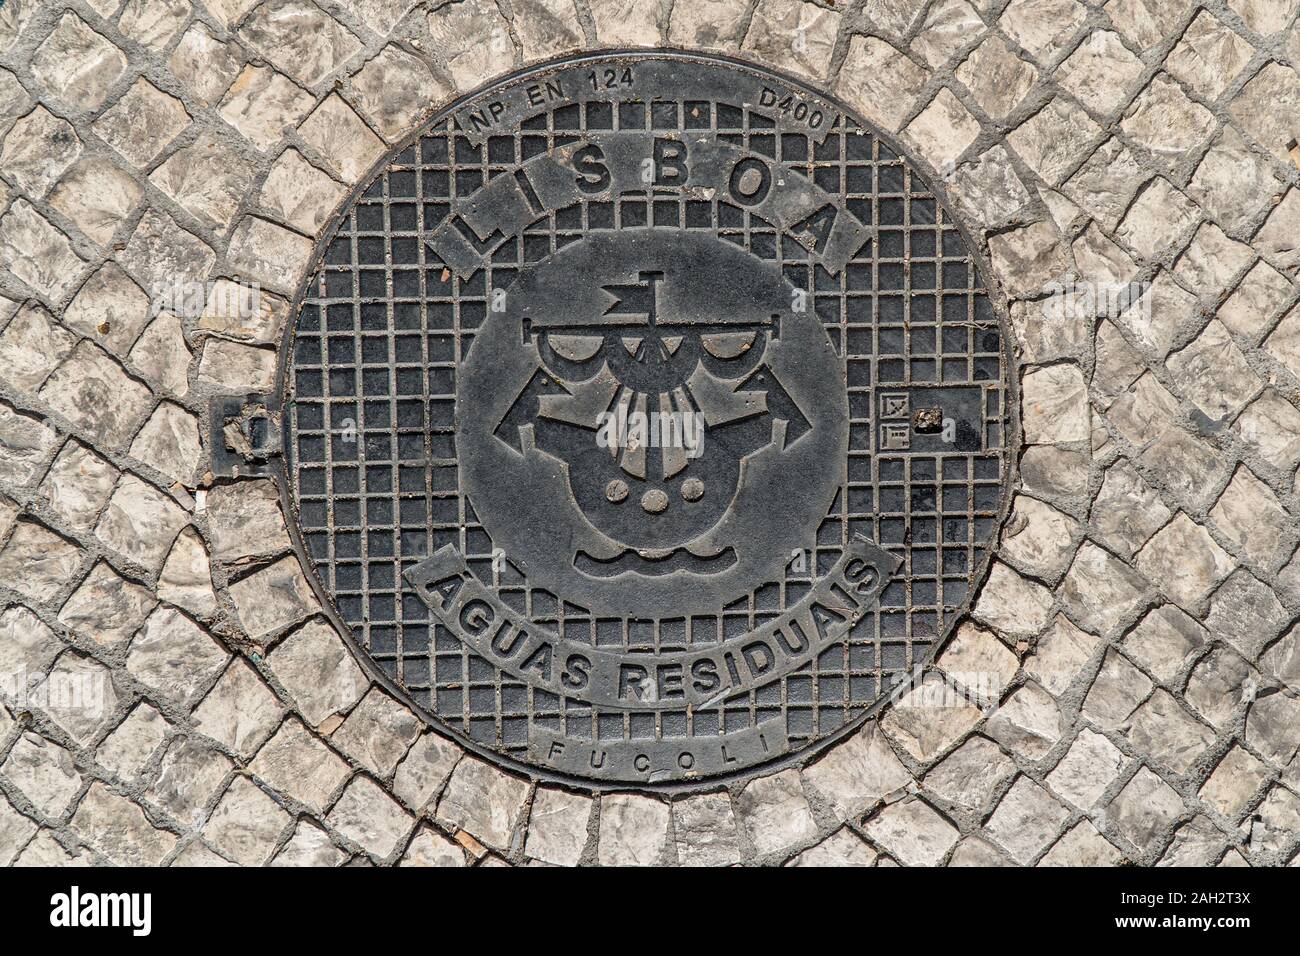 Lisbon, Portugal - october 10, 2017: Black metal hatch  for residual waters in a stone pavement in Lisbon,Portugal Stock Photo